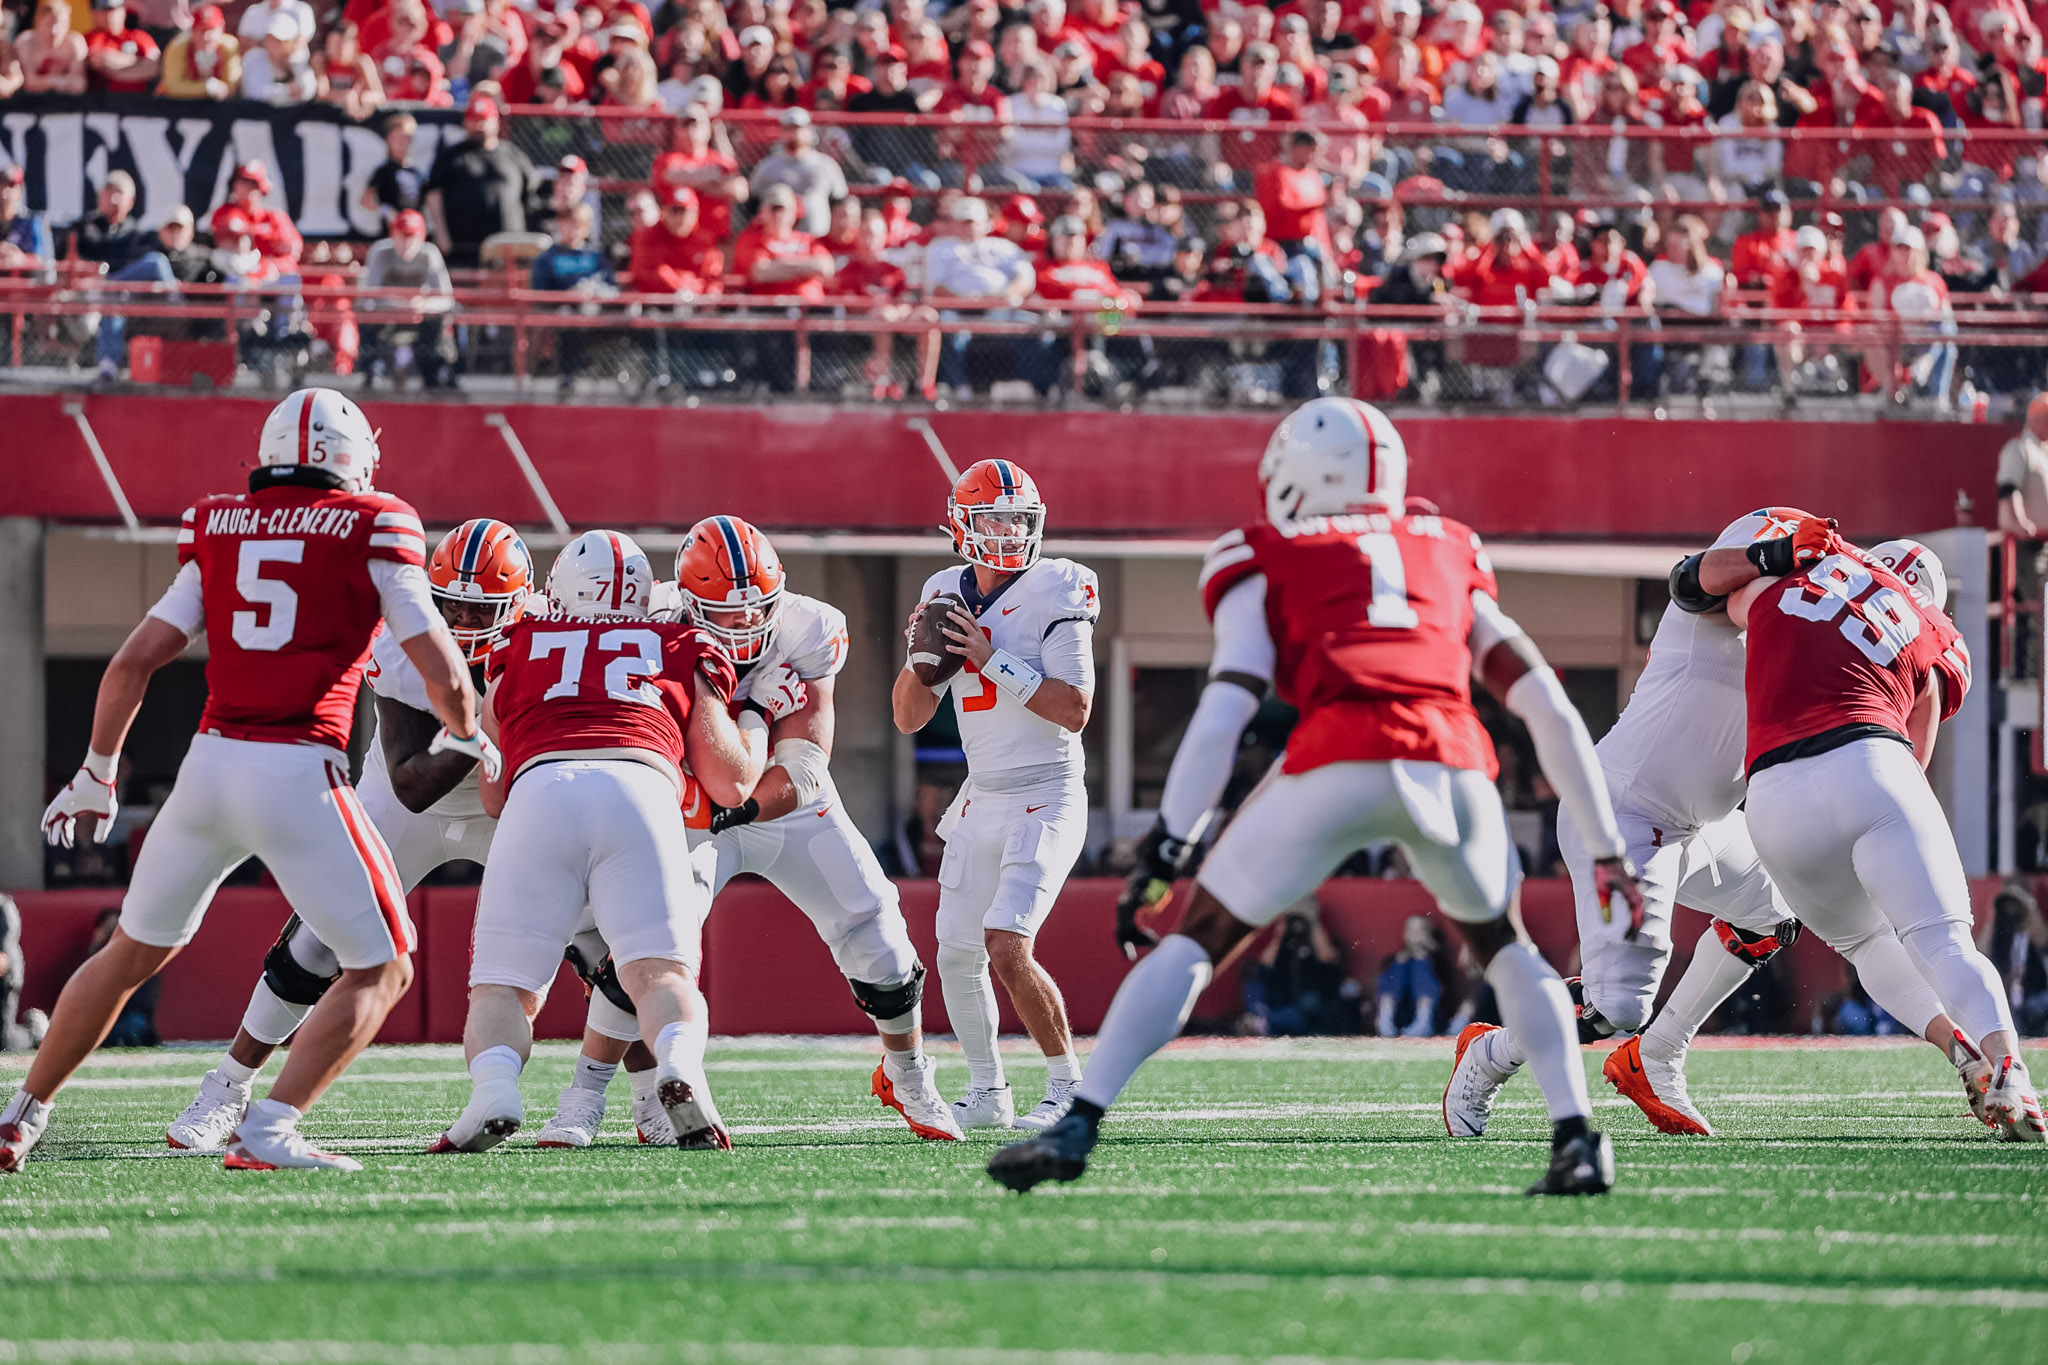 Illini Film Review - How Practice Habits Become Gameday Realities